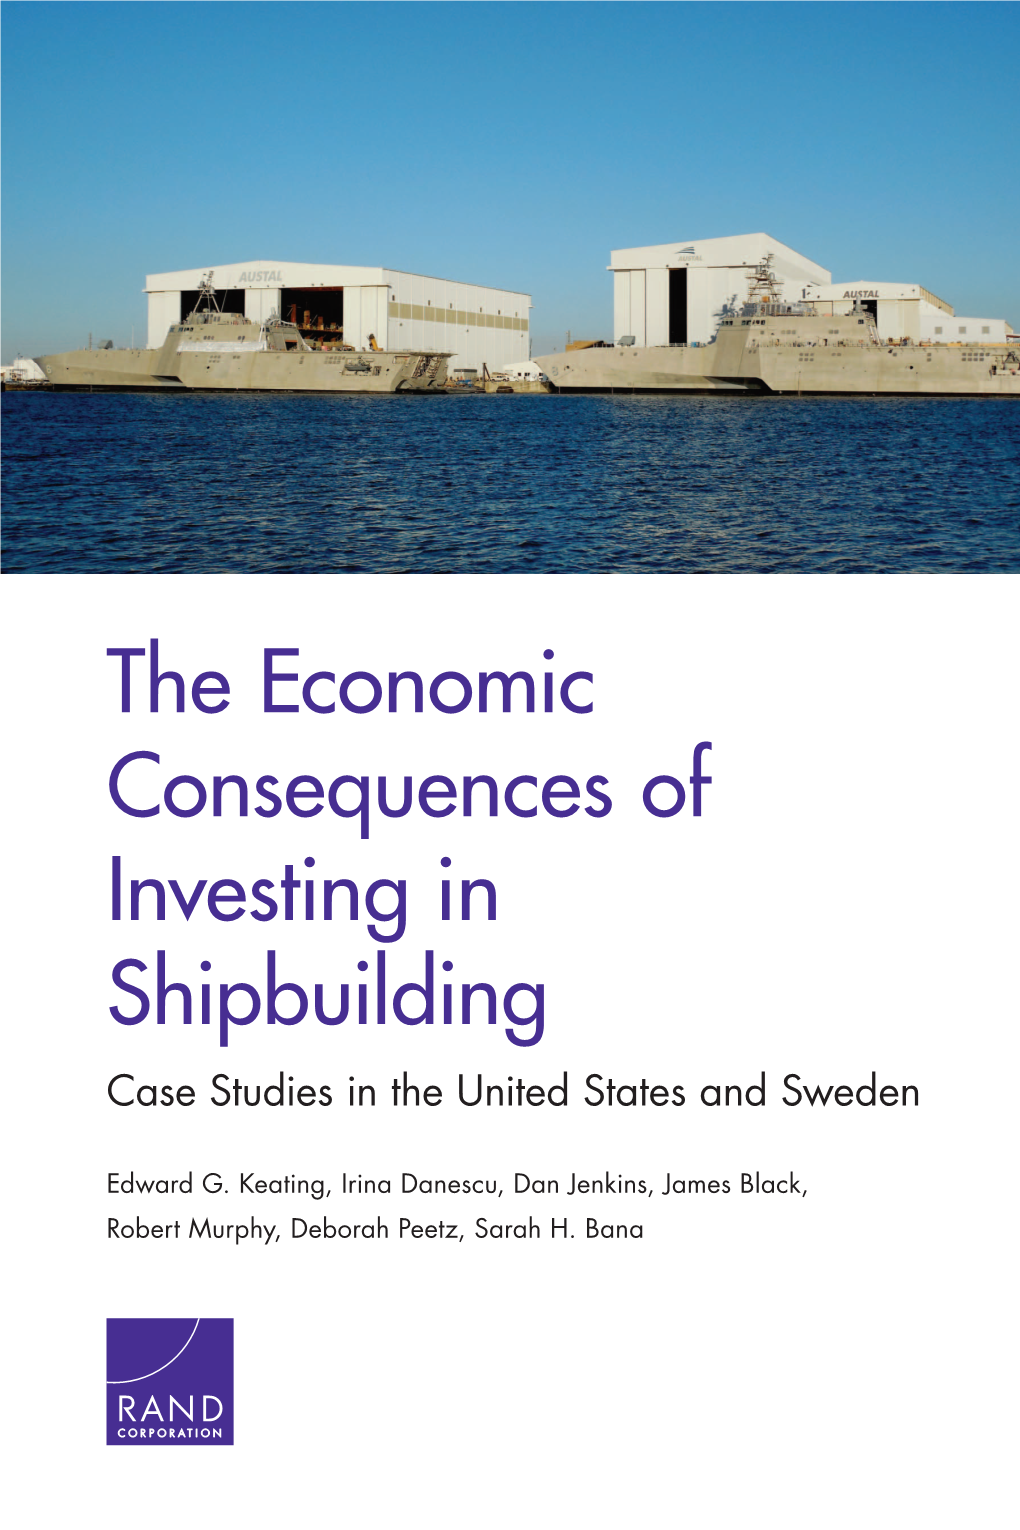 The Economic Consequences of Investing in Shipbuilding Case Studies in the United States and Sweden